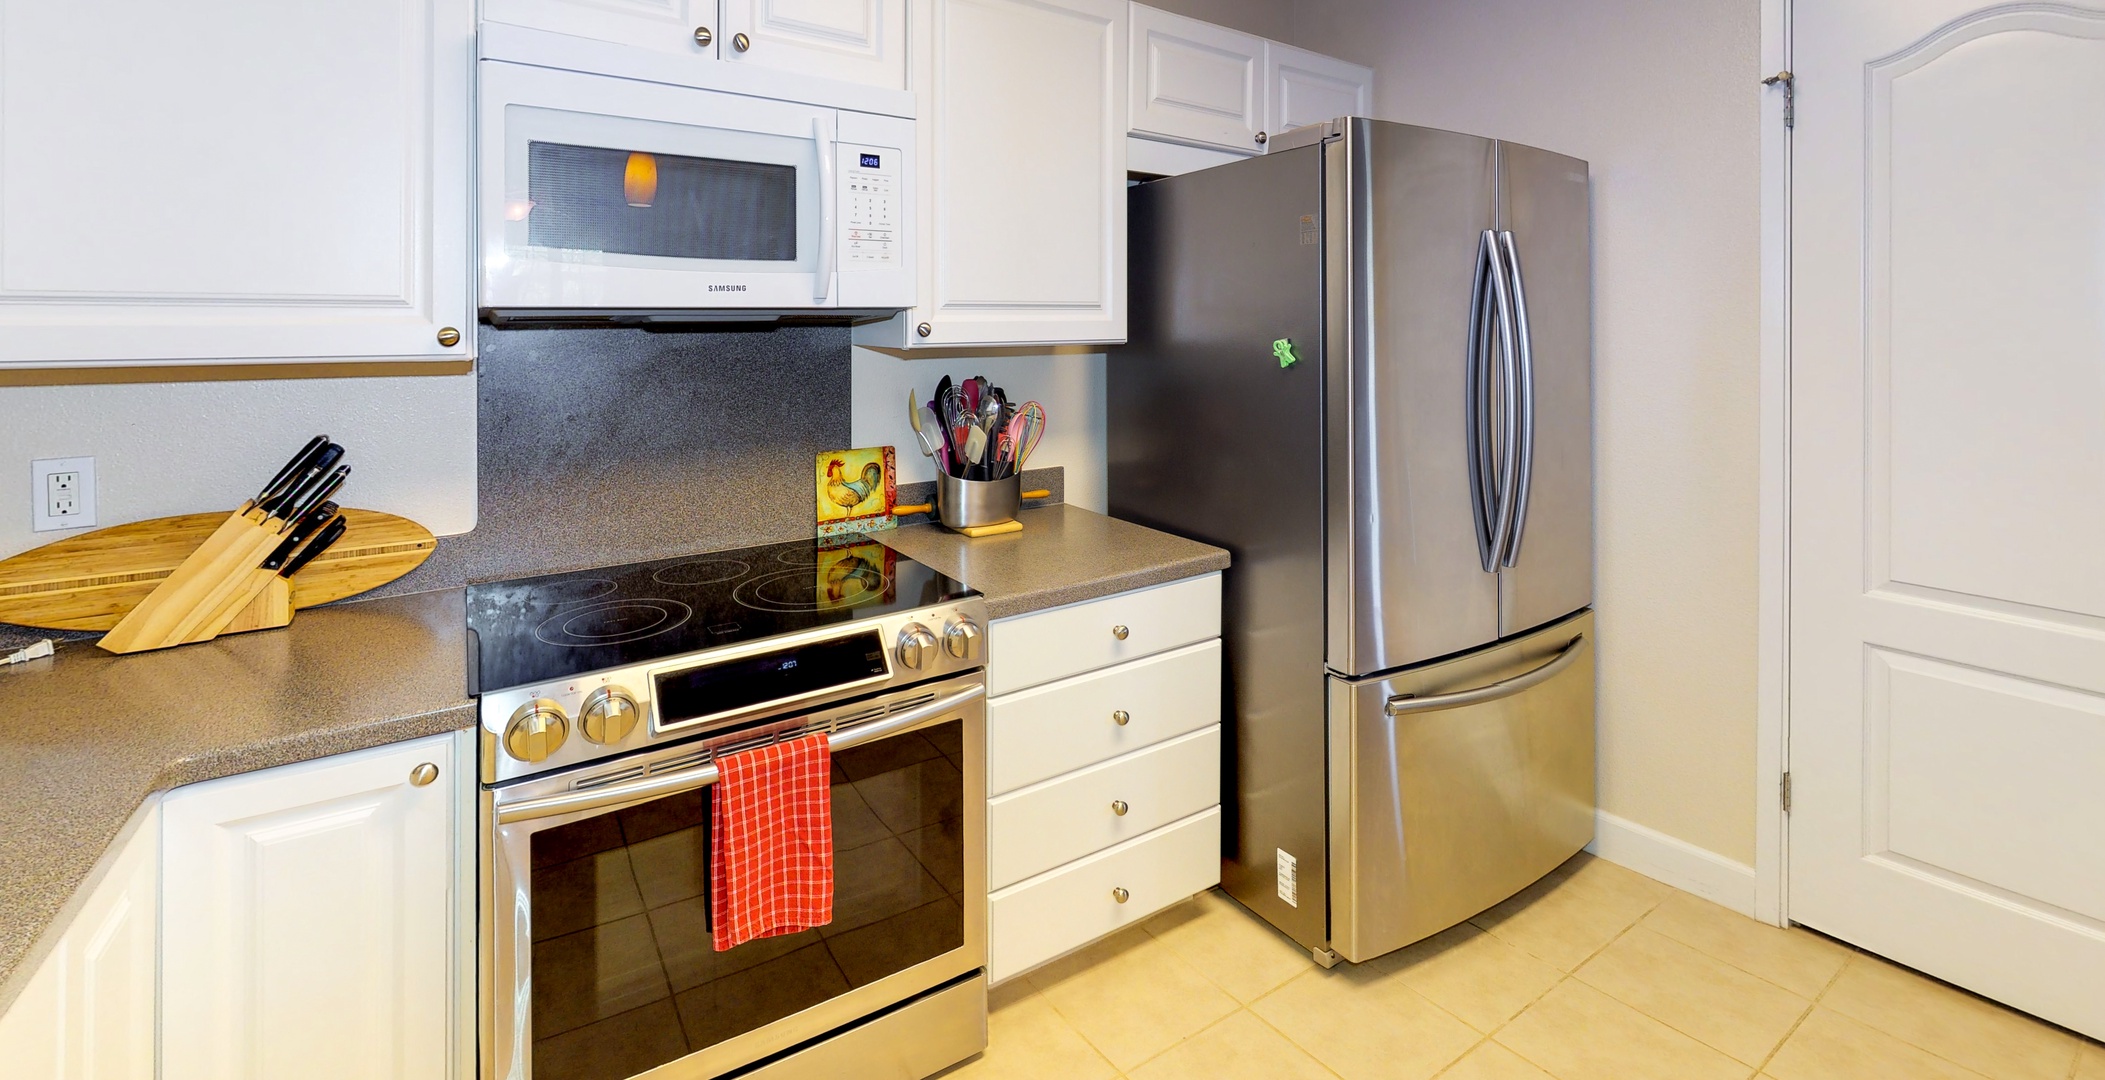 Kapolei Vacation Rentals, Ko Olina Kai 1065E - The kitchen has all the amenities you need in your home away from home.